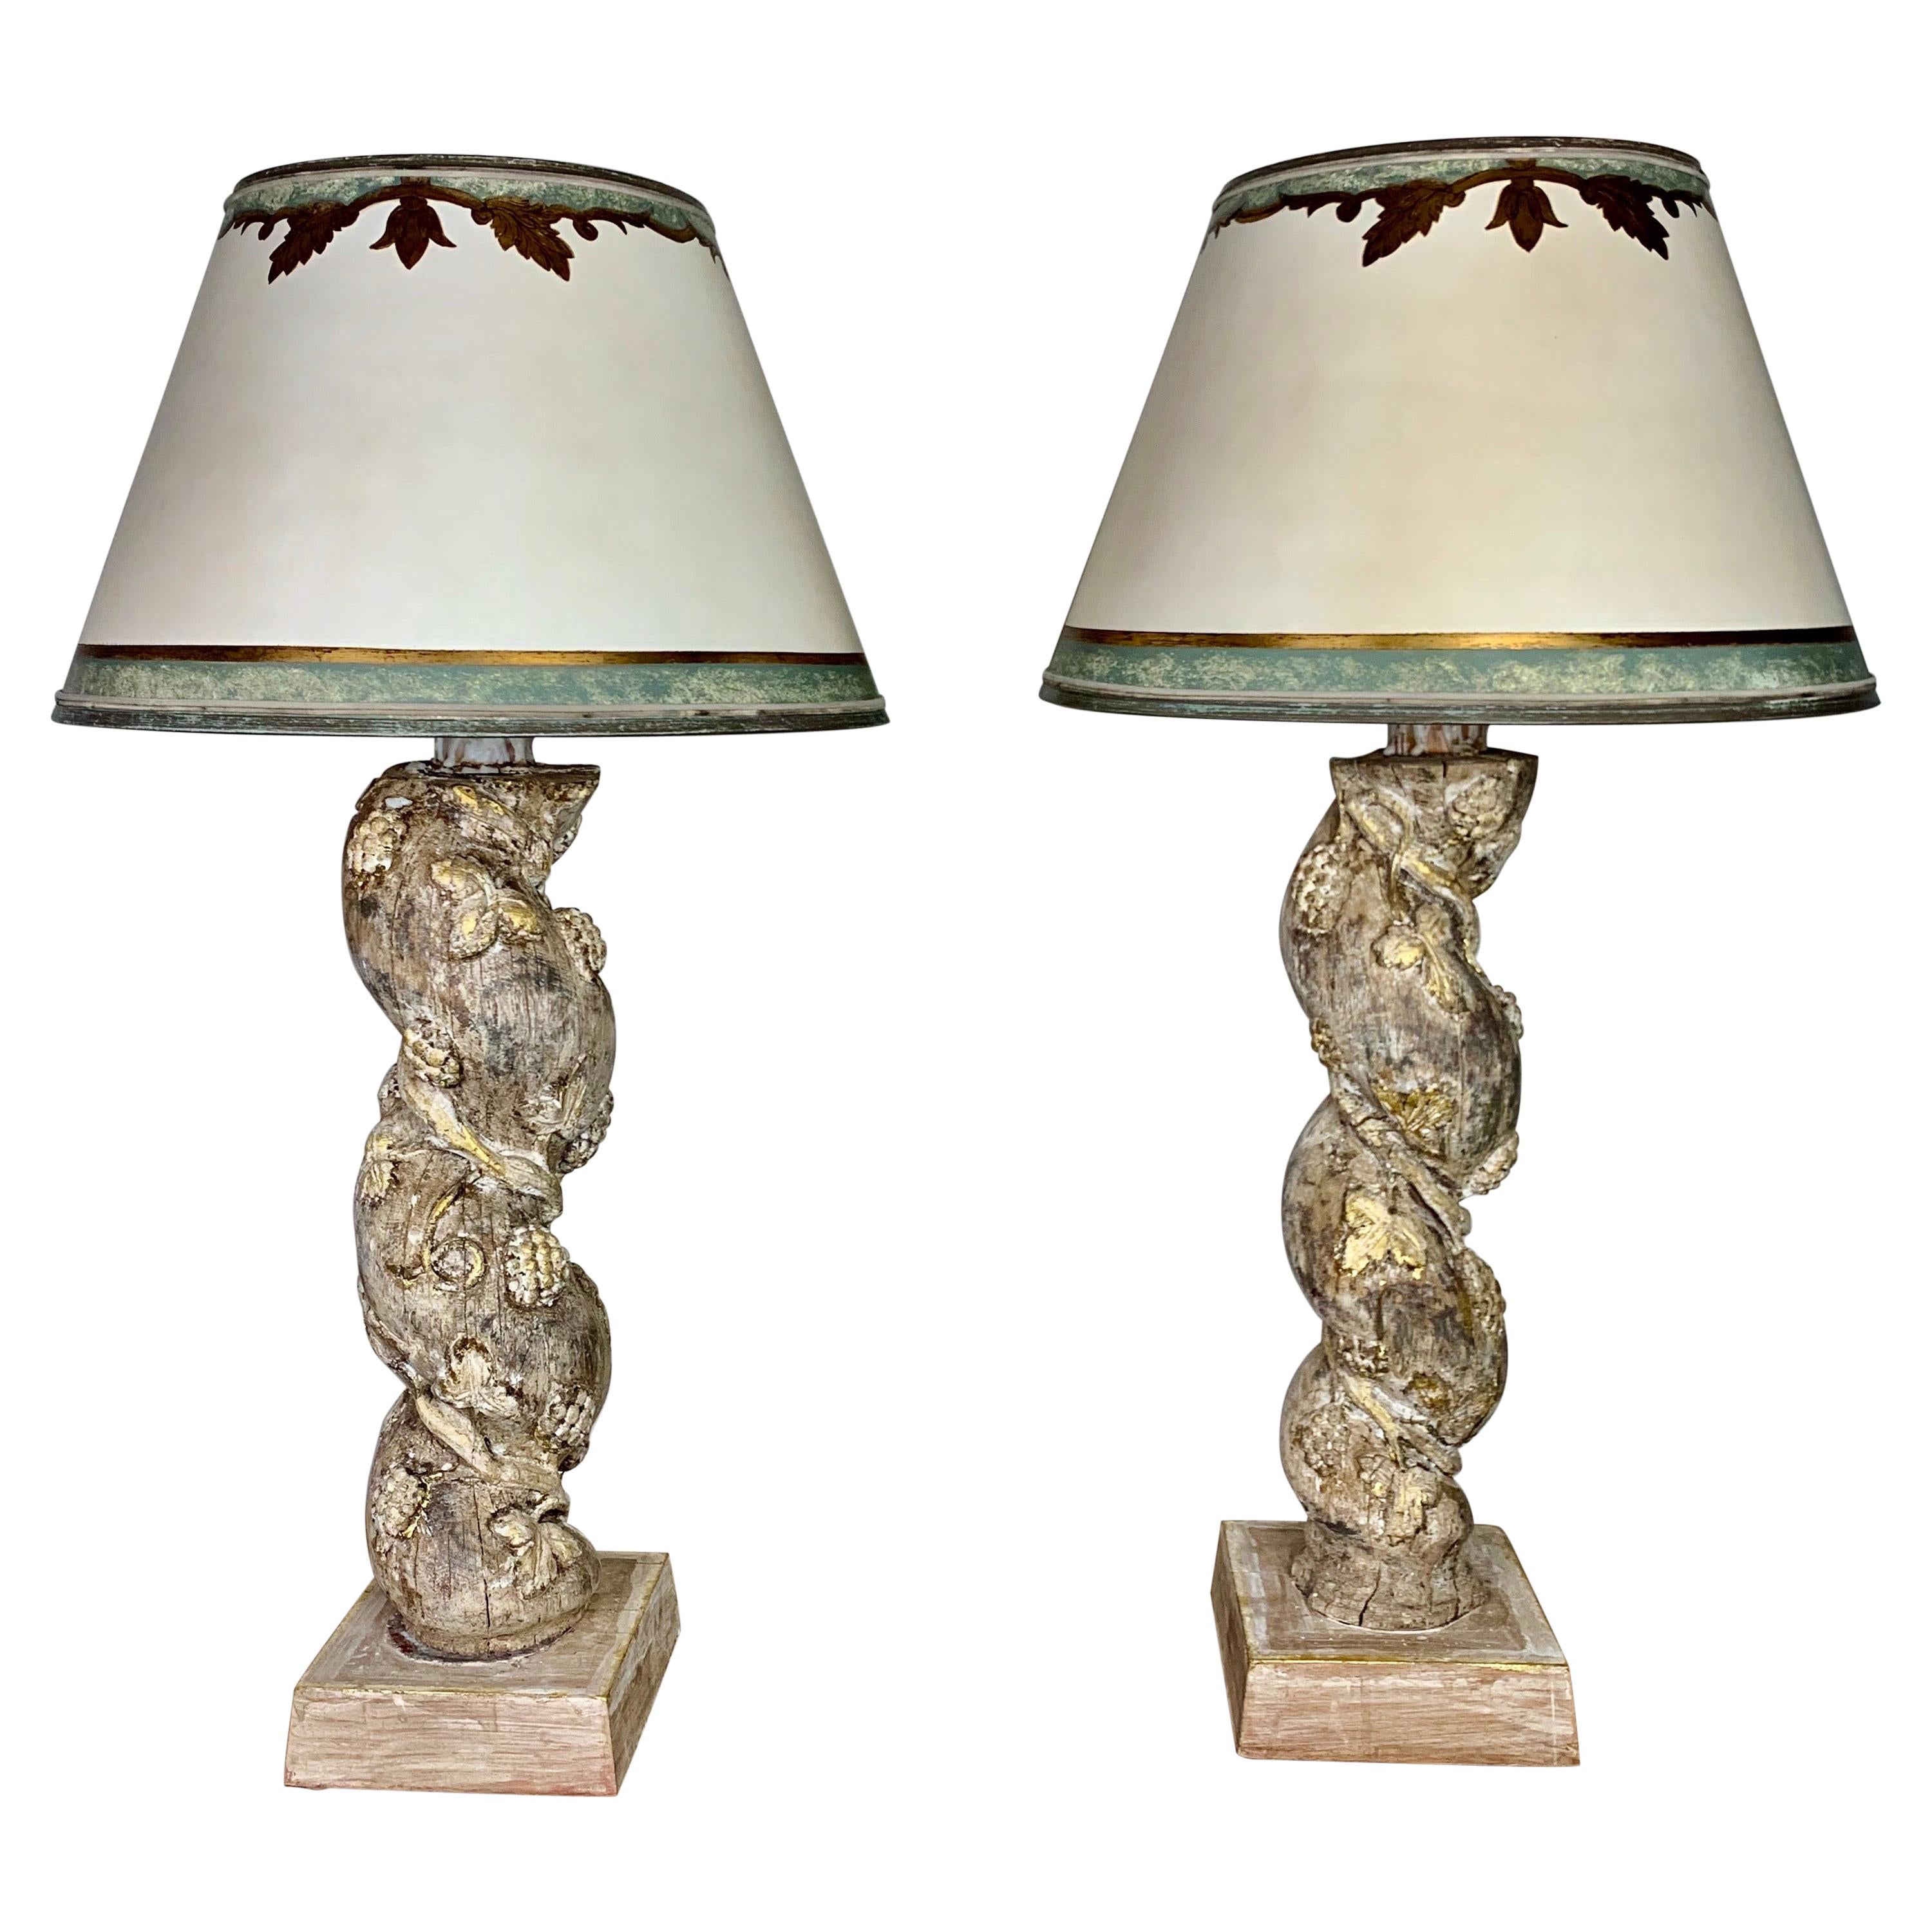 Pair of Italian Culumn lamps with Parchment Shade